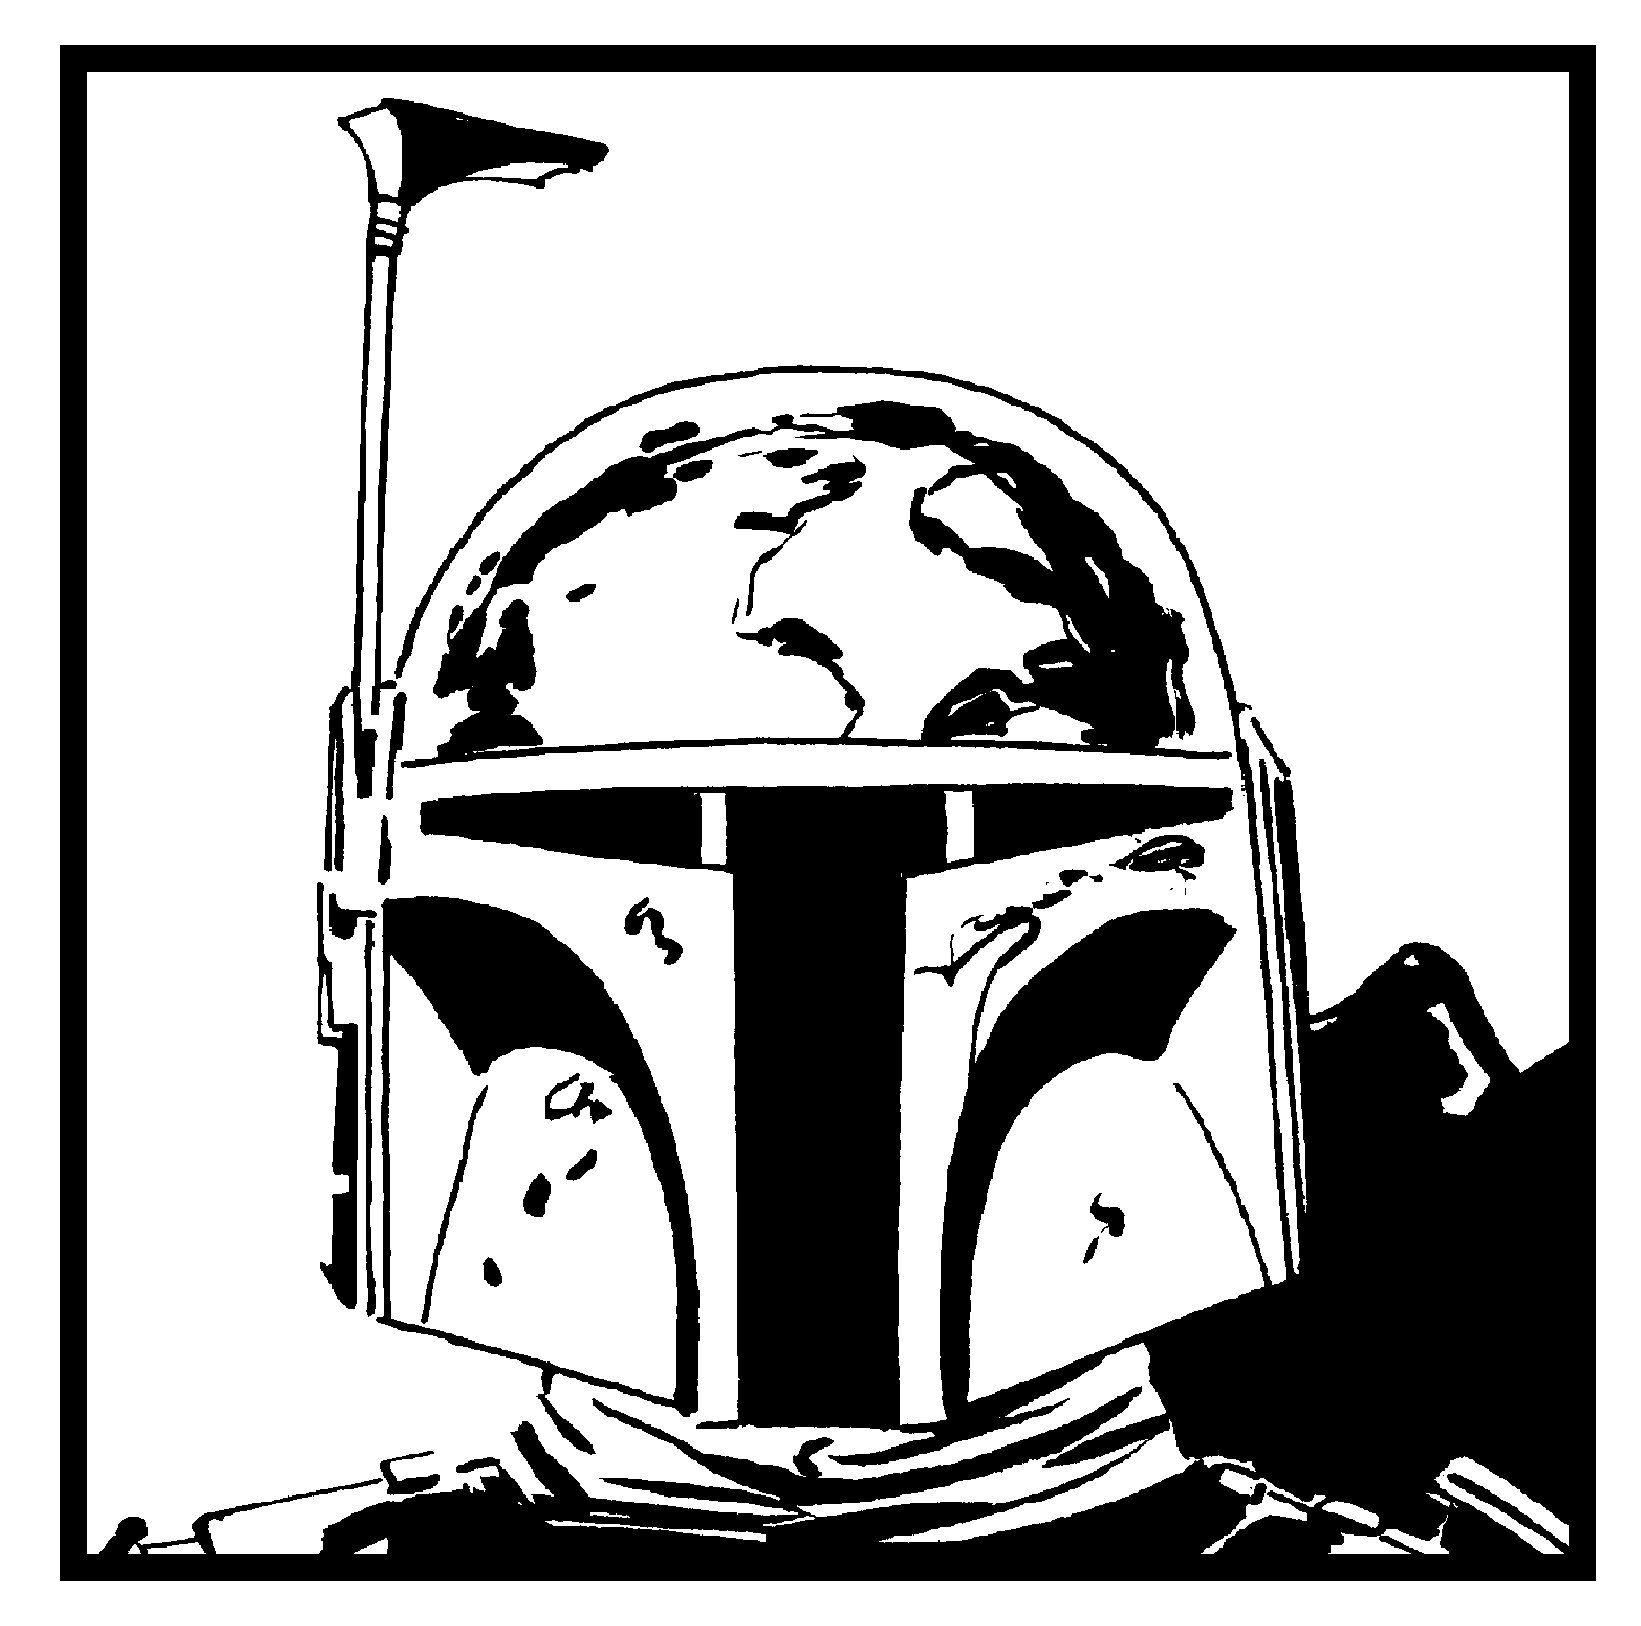 8200 Collections Boba Fett Coloring Pages Printable  HD